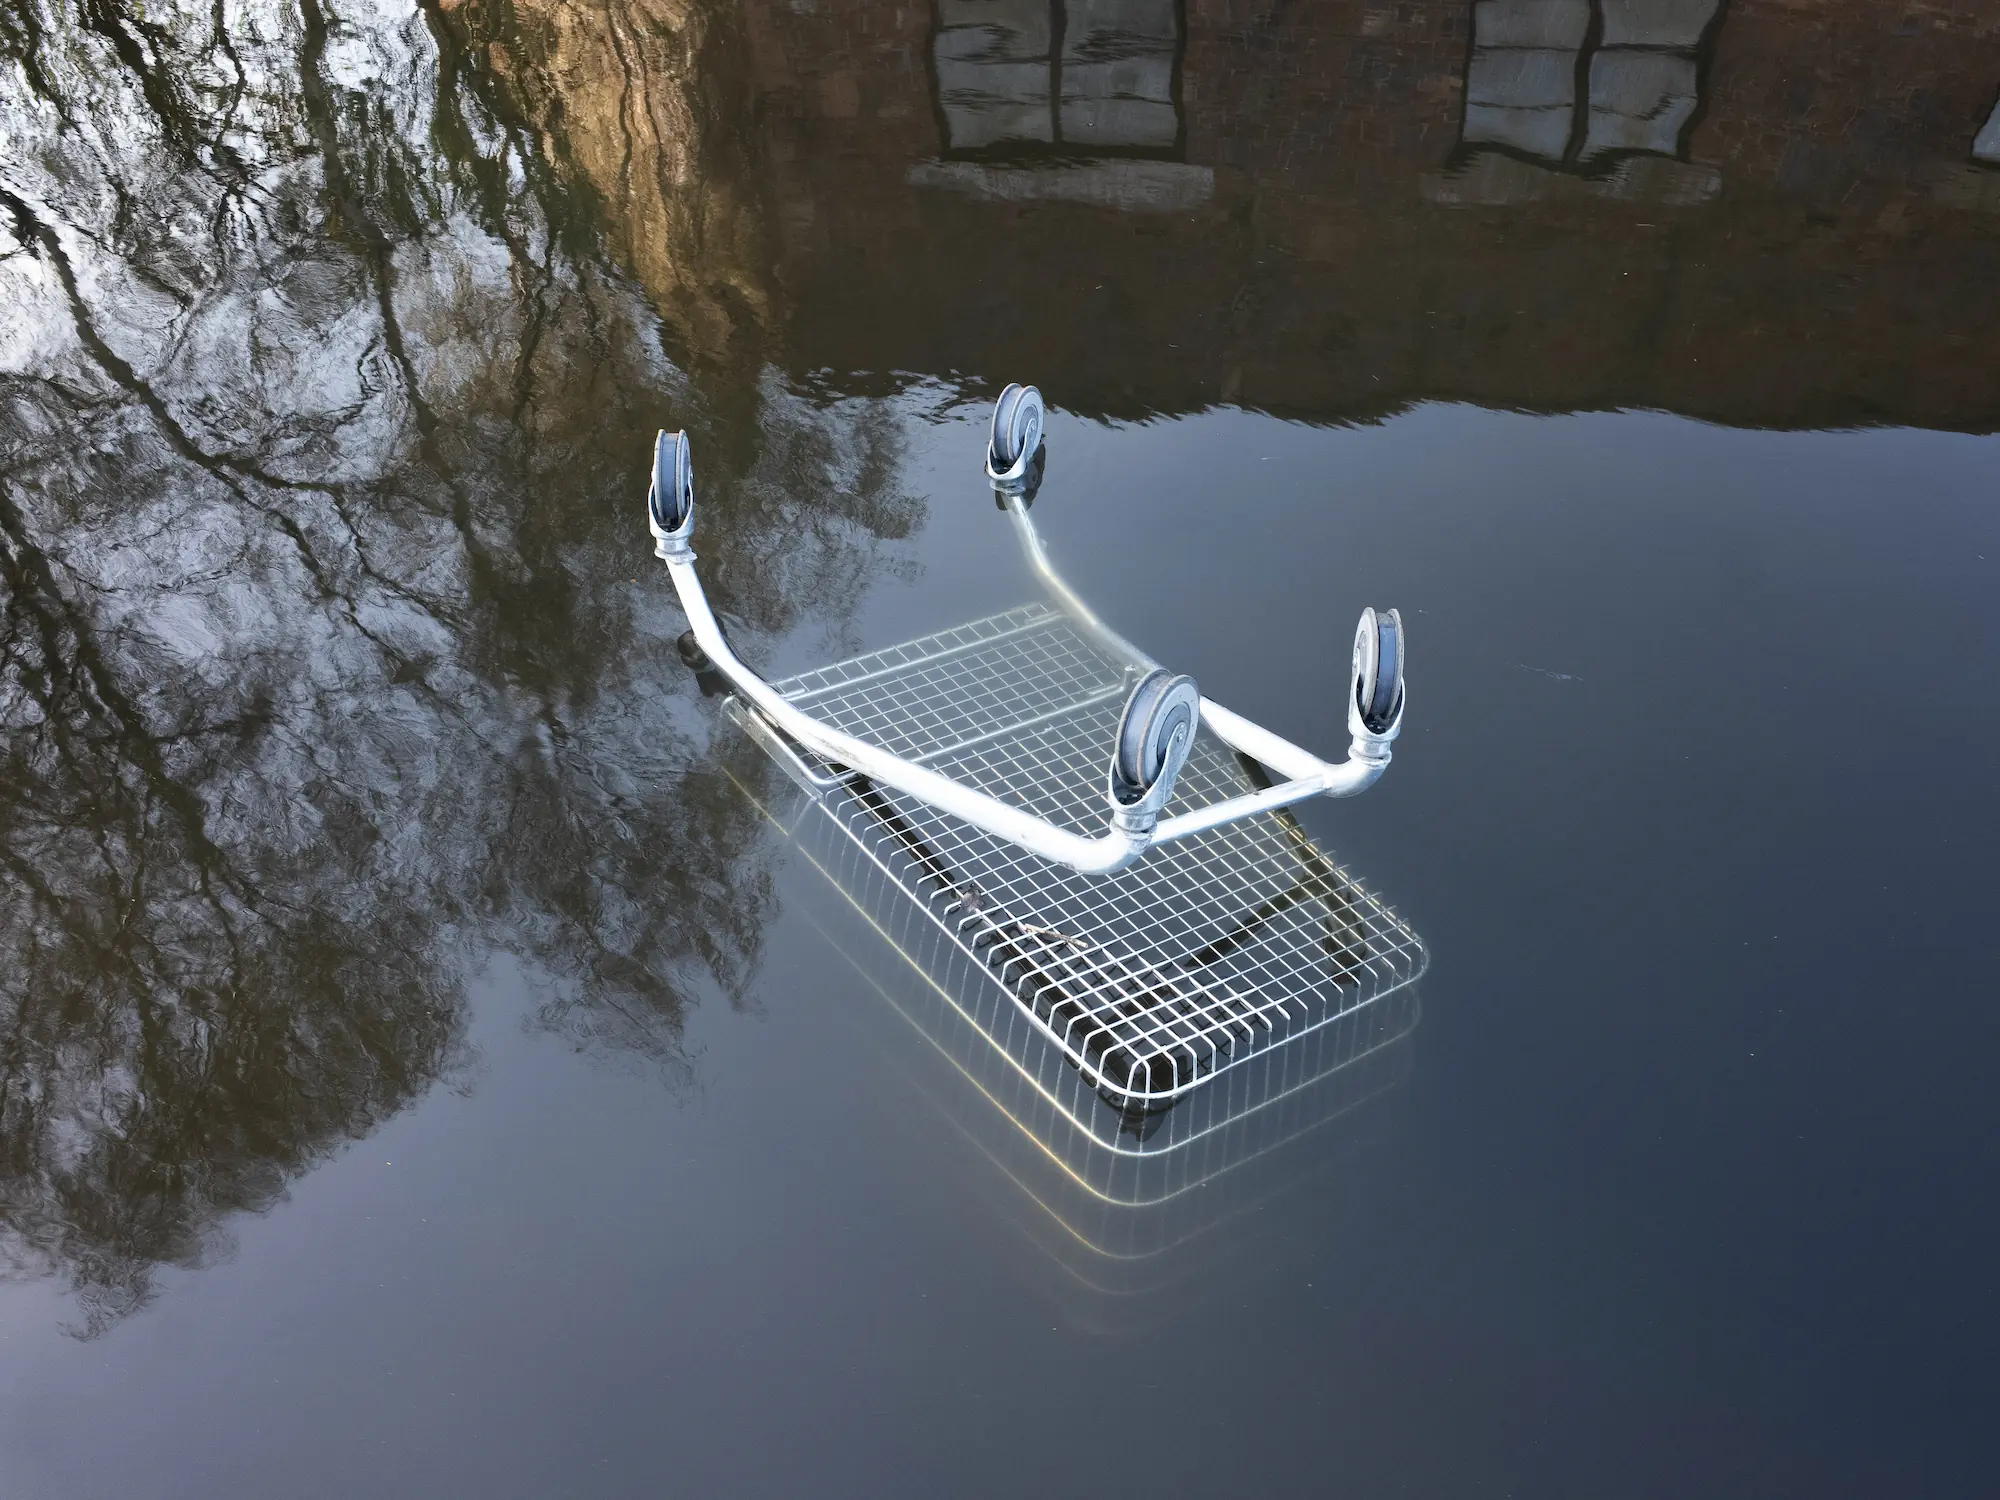 A shopping trolly is falling in the canal